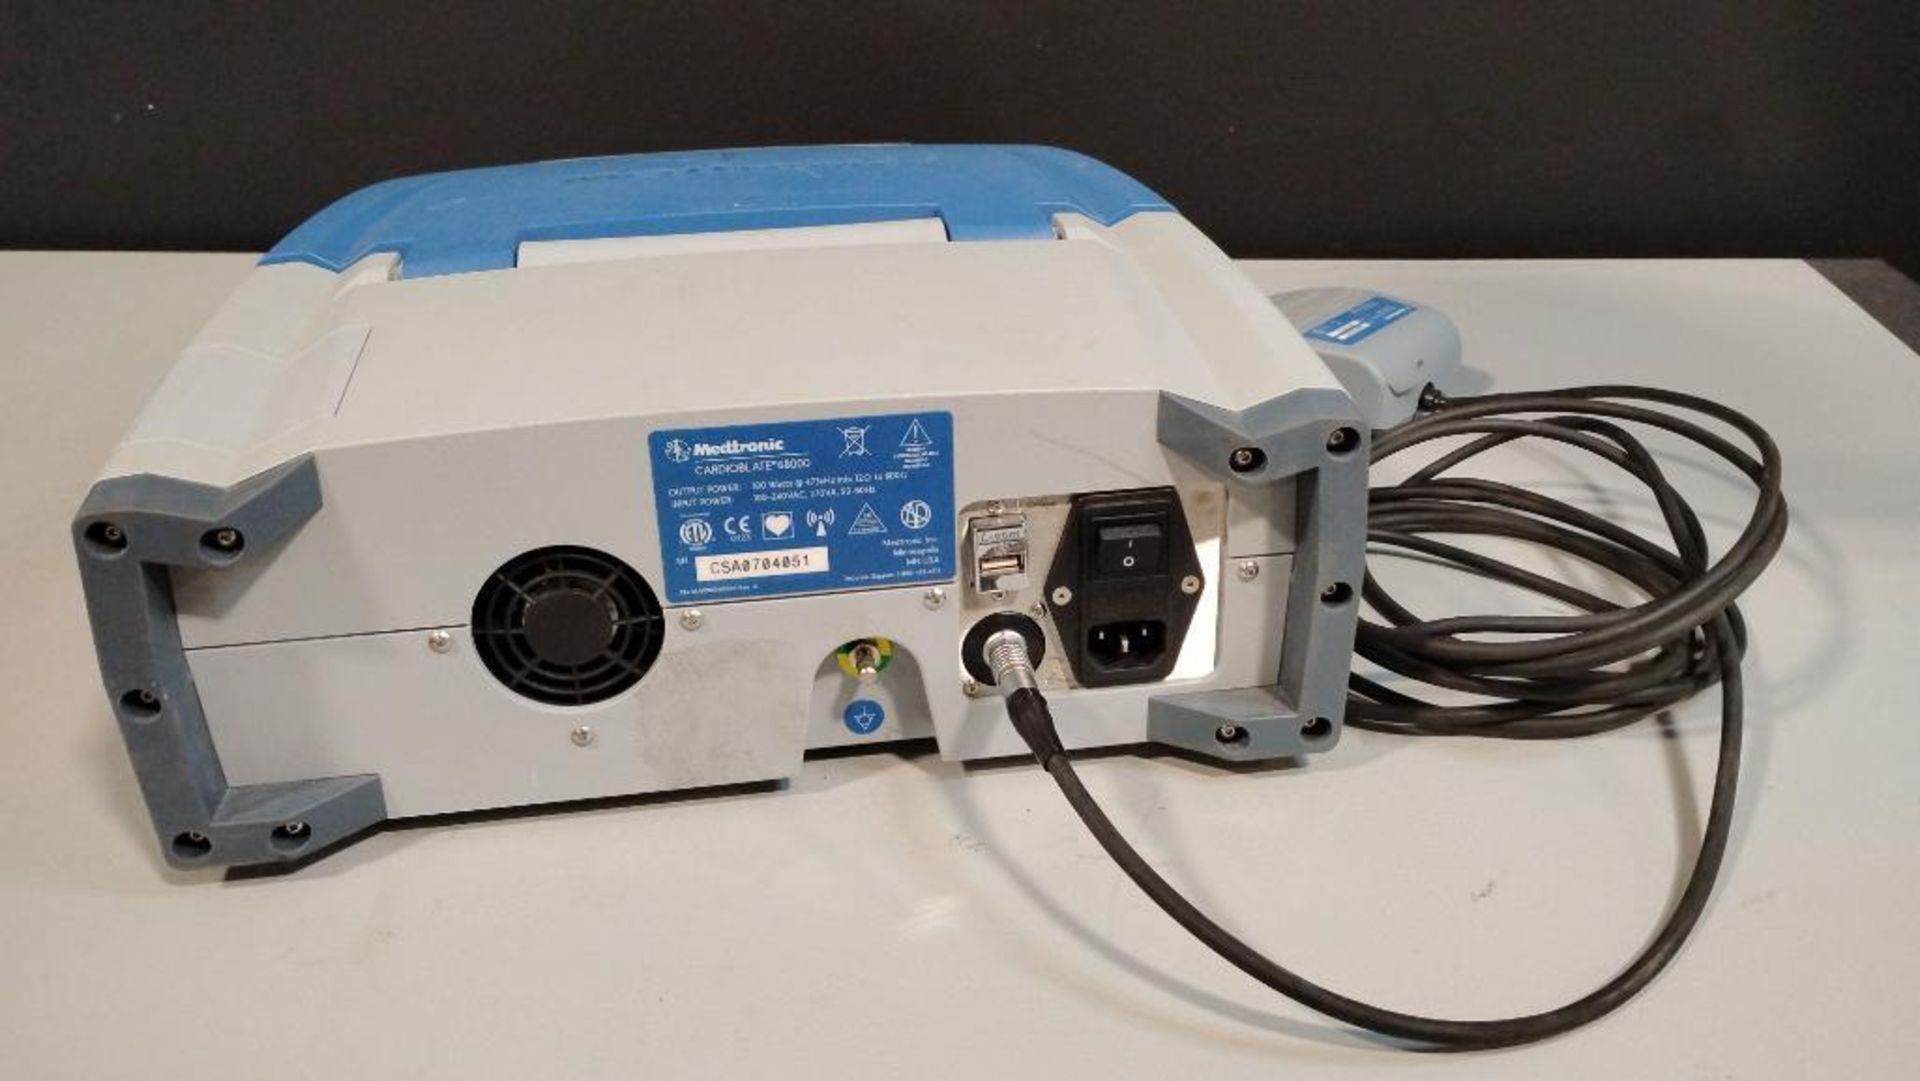 MEDTRONIC CARDIOBLATE 68000 SURGICAL ABLATION SYSTEM WITH FOOTSWITCH - Image 4 of 5